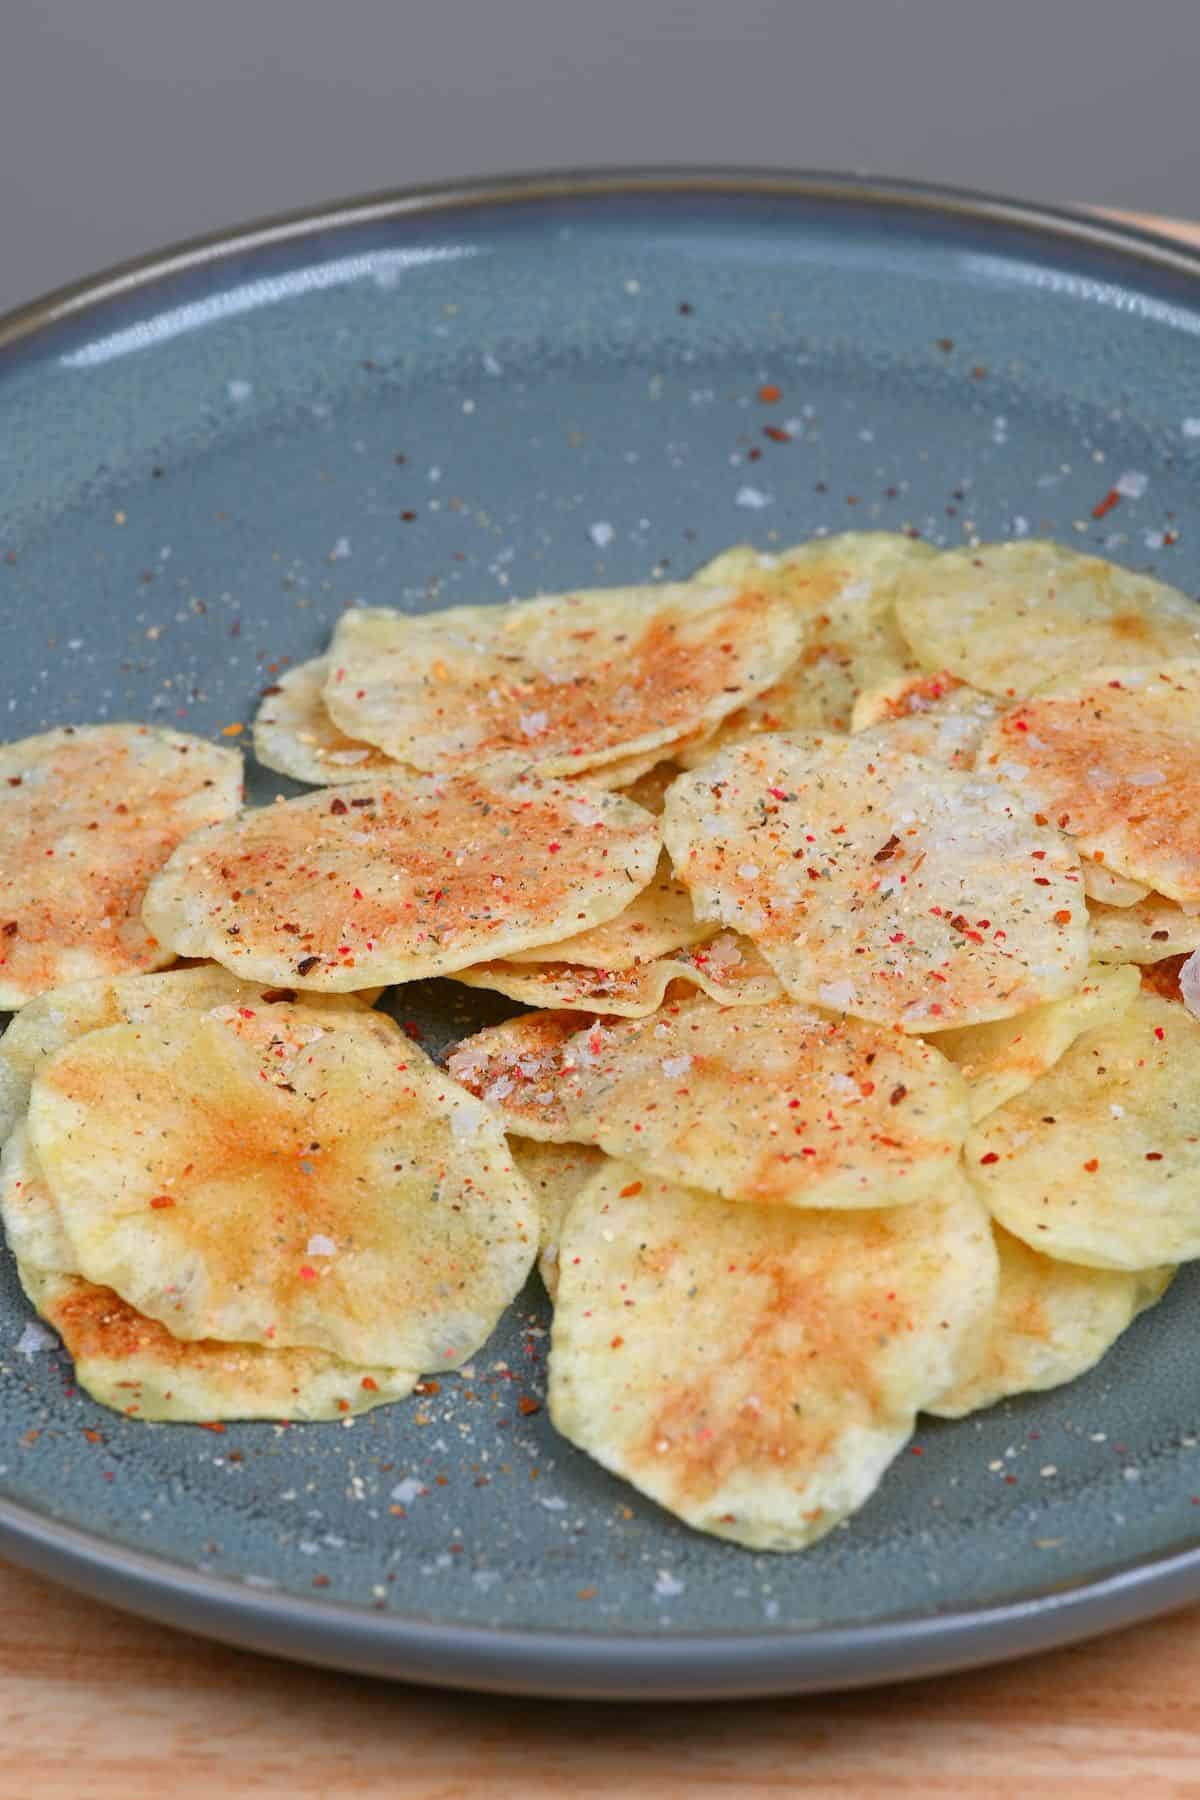 Potato chips with salt and spice in a plate